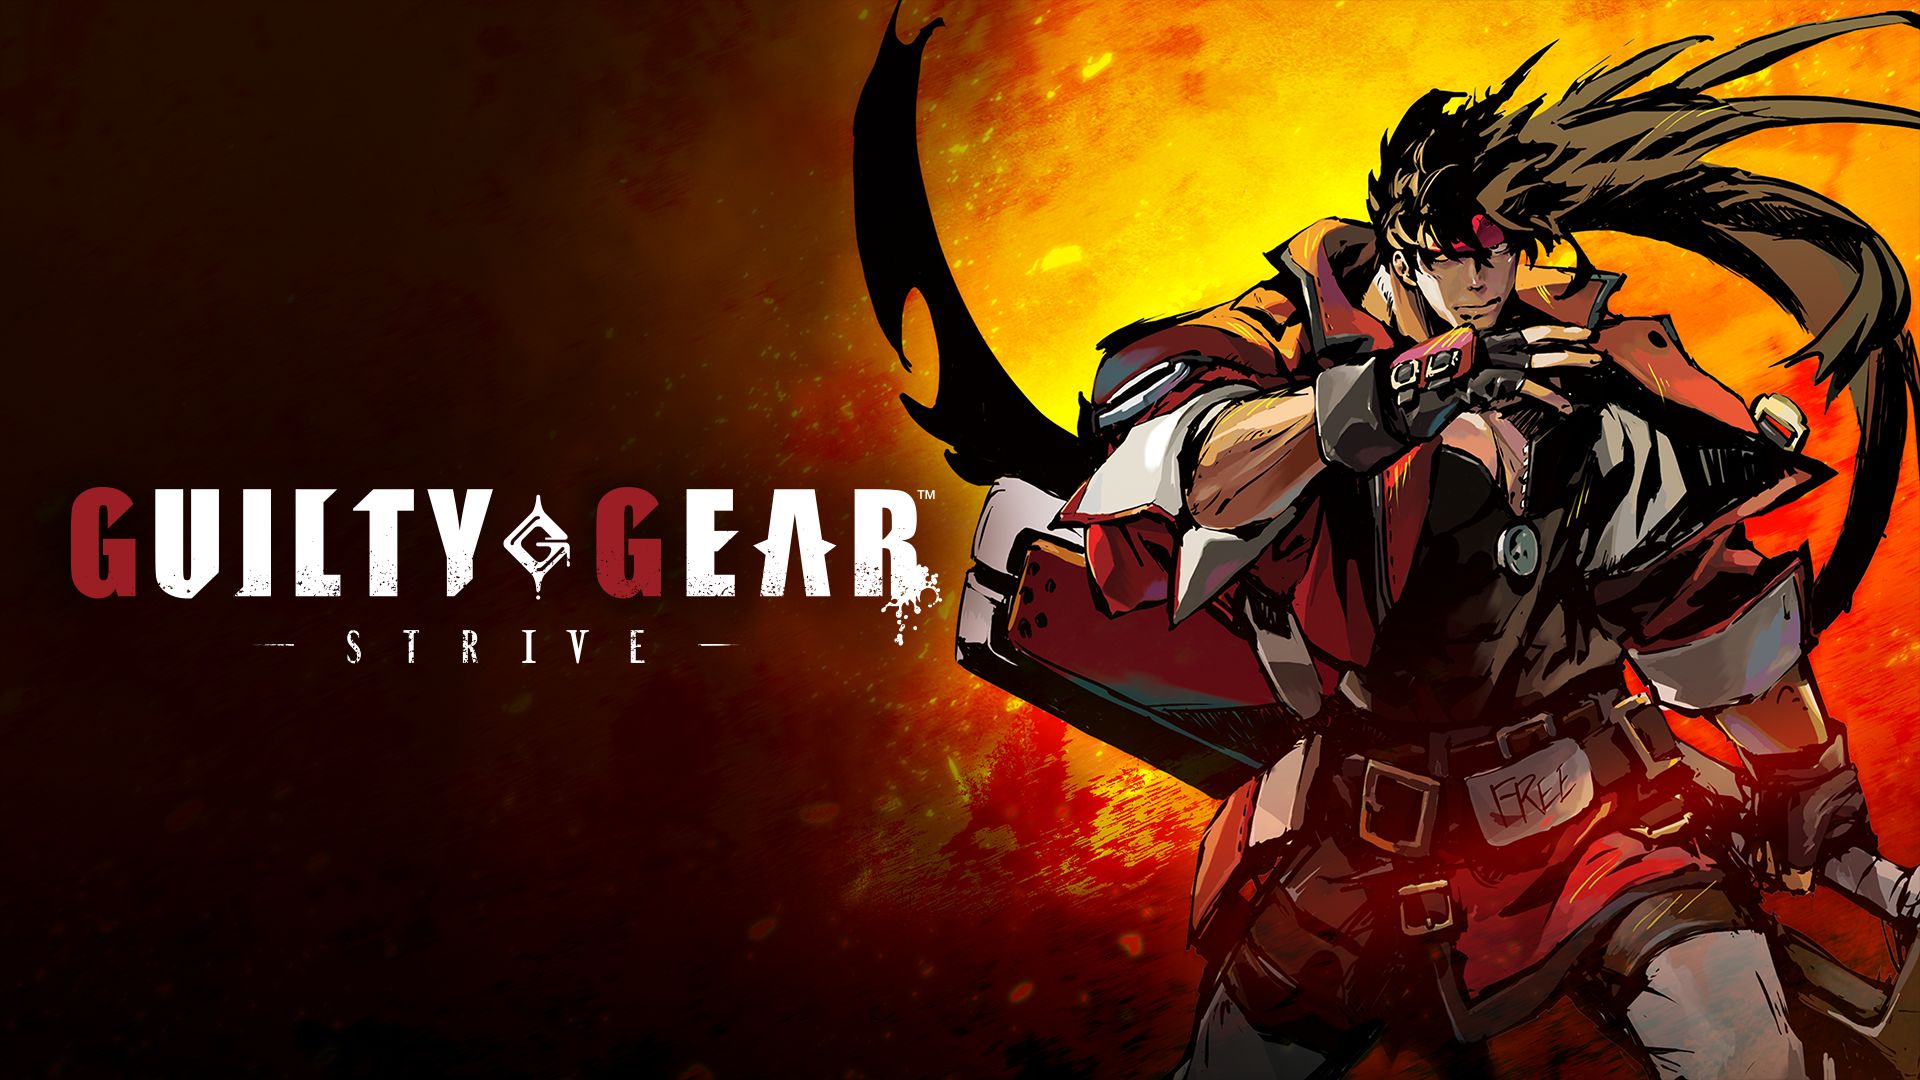 Coming to Xbox Game Pass: Guilty Gear -Strive-, Sid Meier’s Civilization 6, Valheim, and More – Xbox Wire